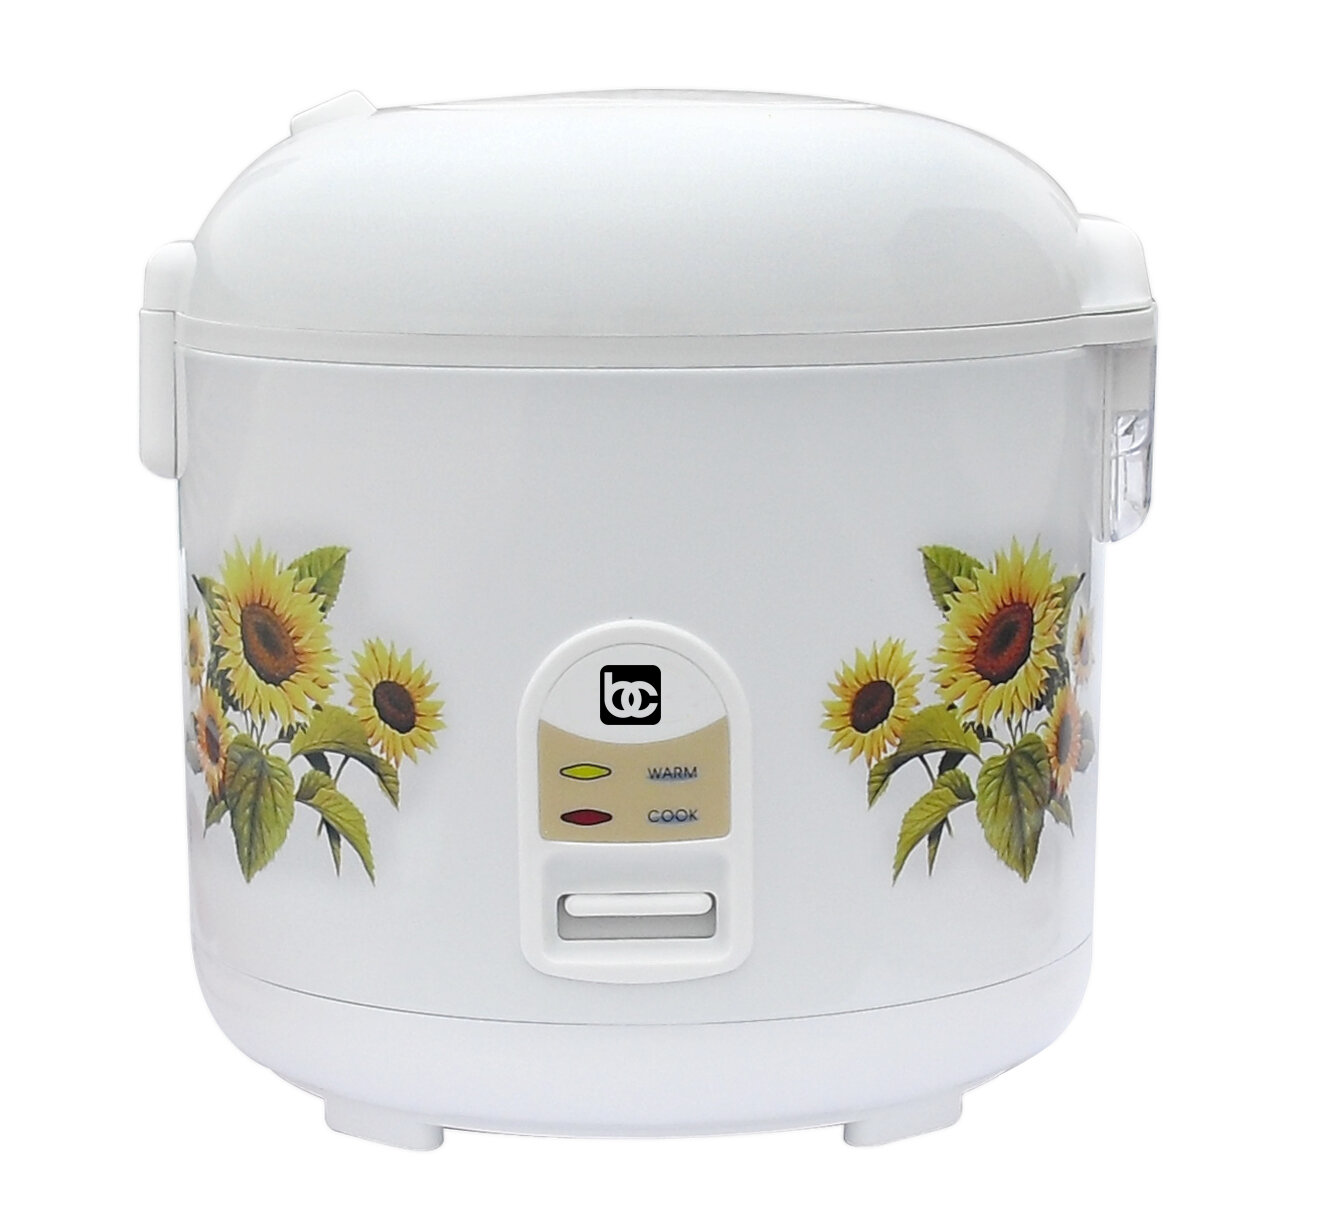  CHACEEF Mini Rice Cooker 2-Cups Uncooked, 1.2L Rice Cooker Small  with Non-stick Pot, Small Rice Cooker with One Touch & Keep Warm Function,  Food Steamer, Yellow: Home & Kitchen